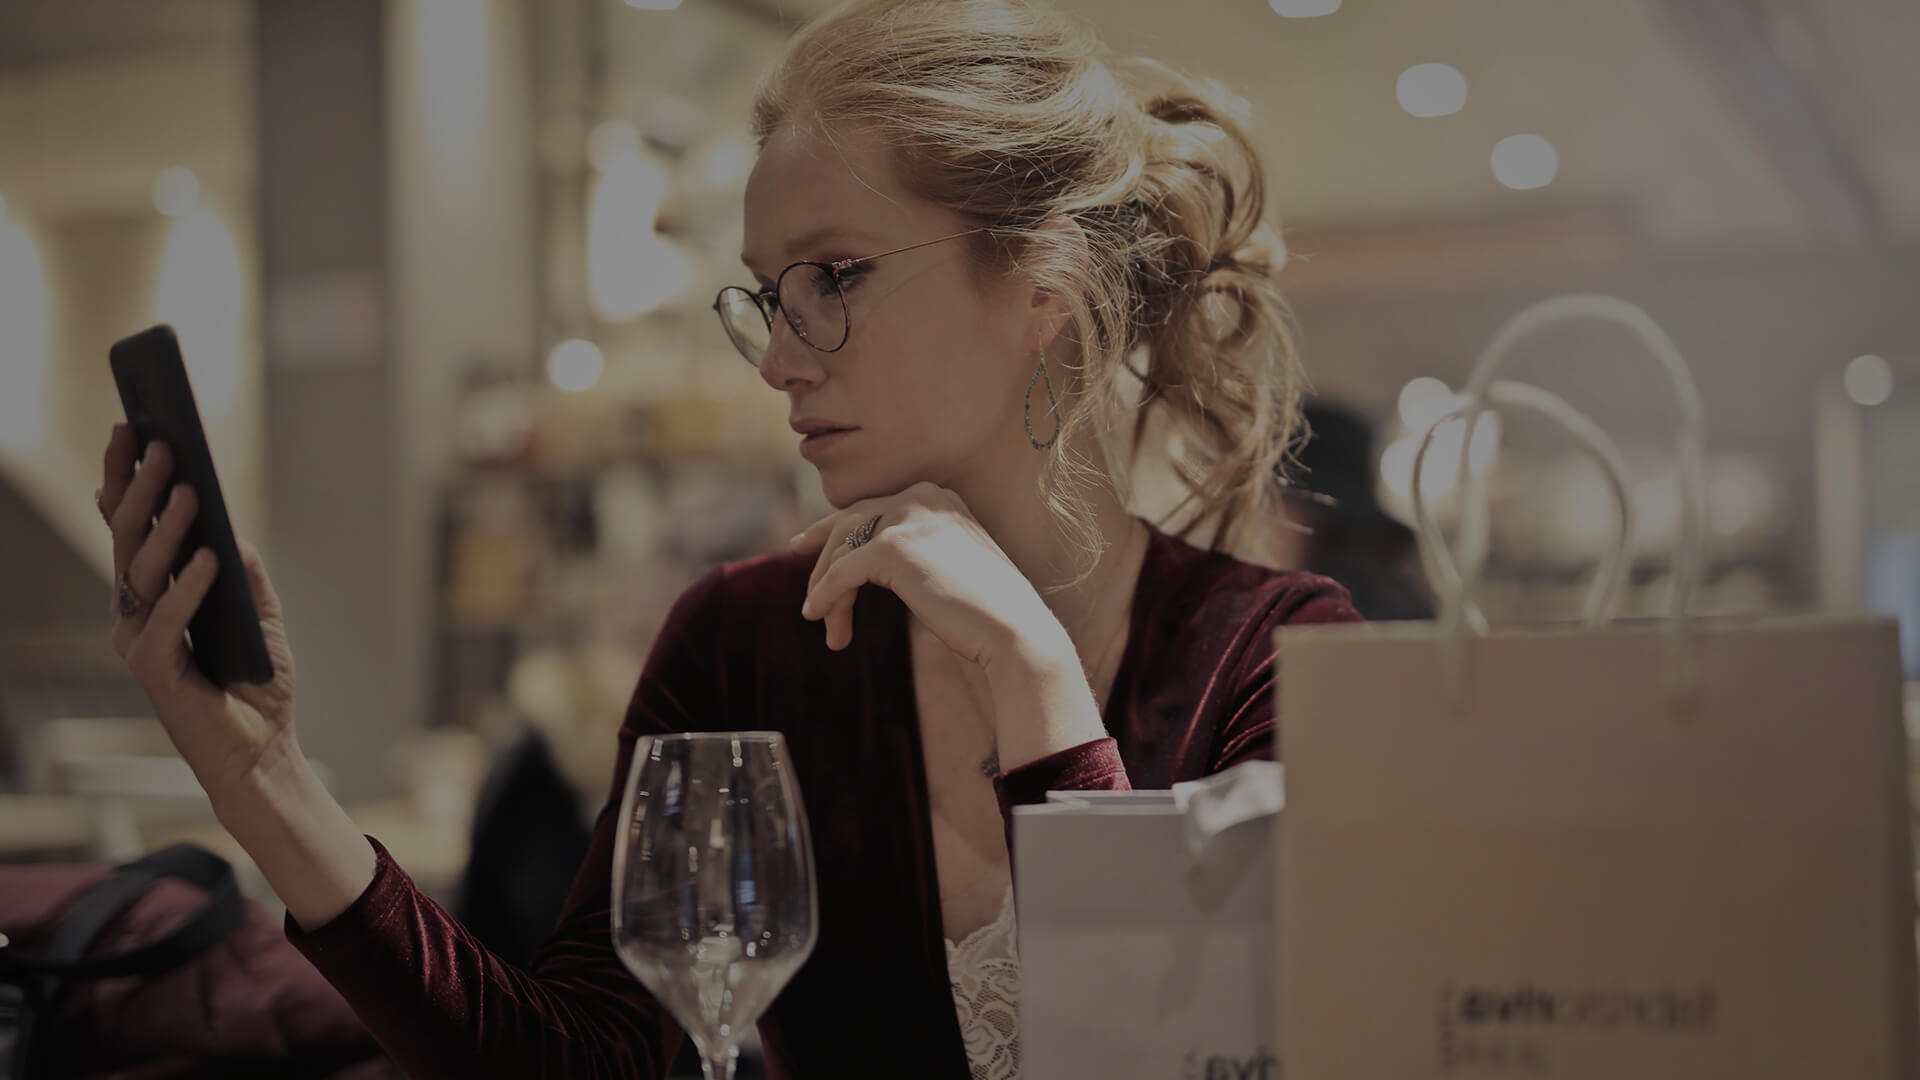 Woman looking at phone in restaurant